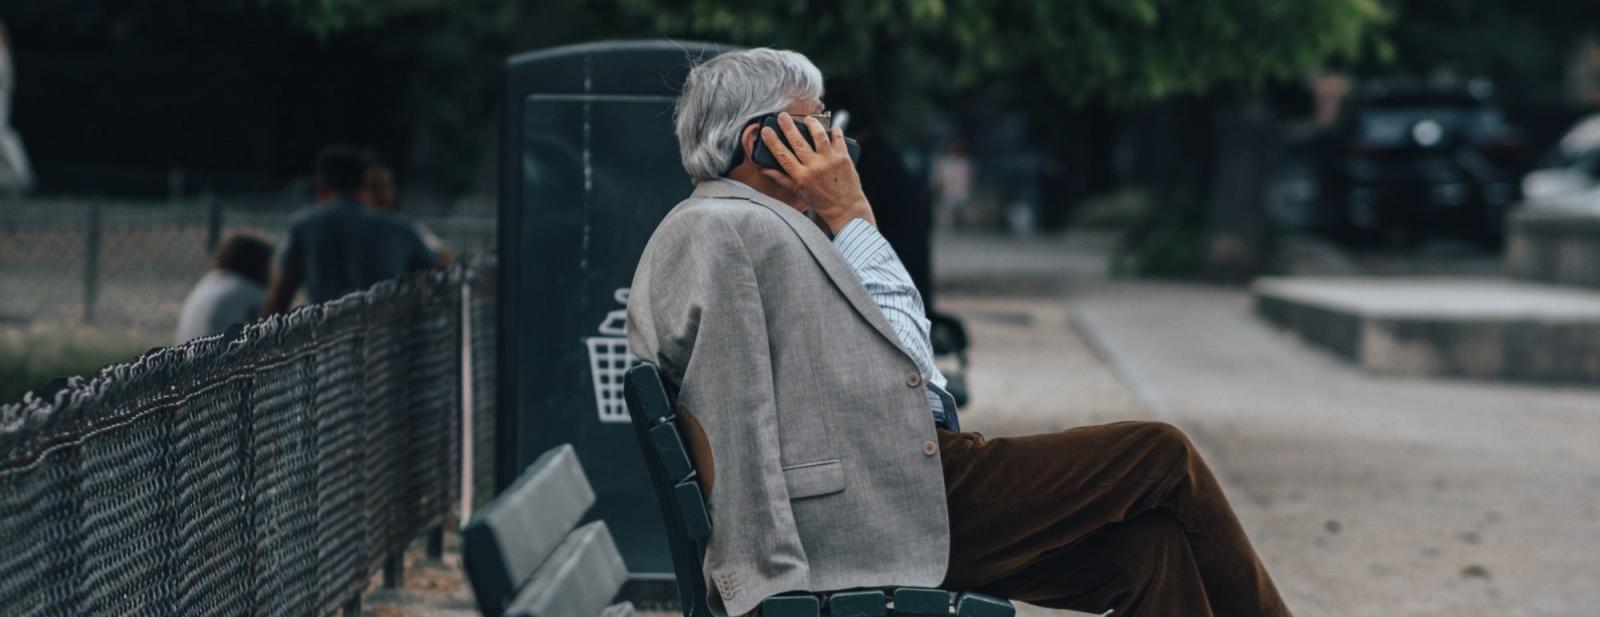 A photo of a man sitting on a bench outdoors whilst on a phone call